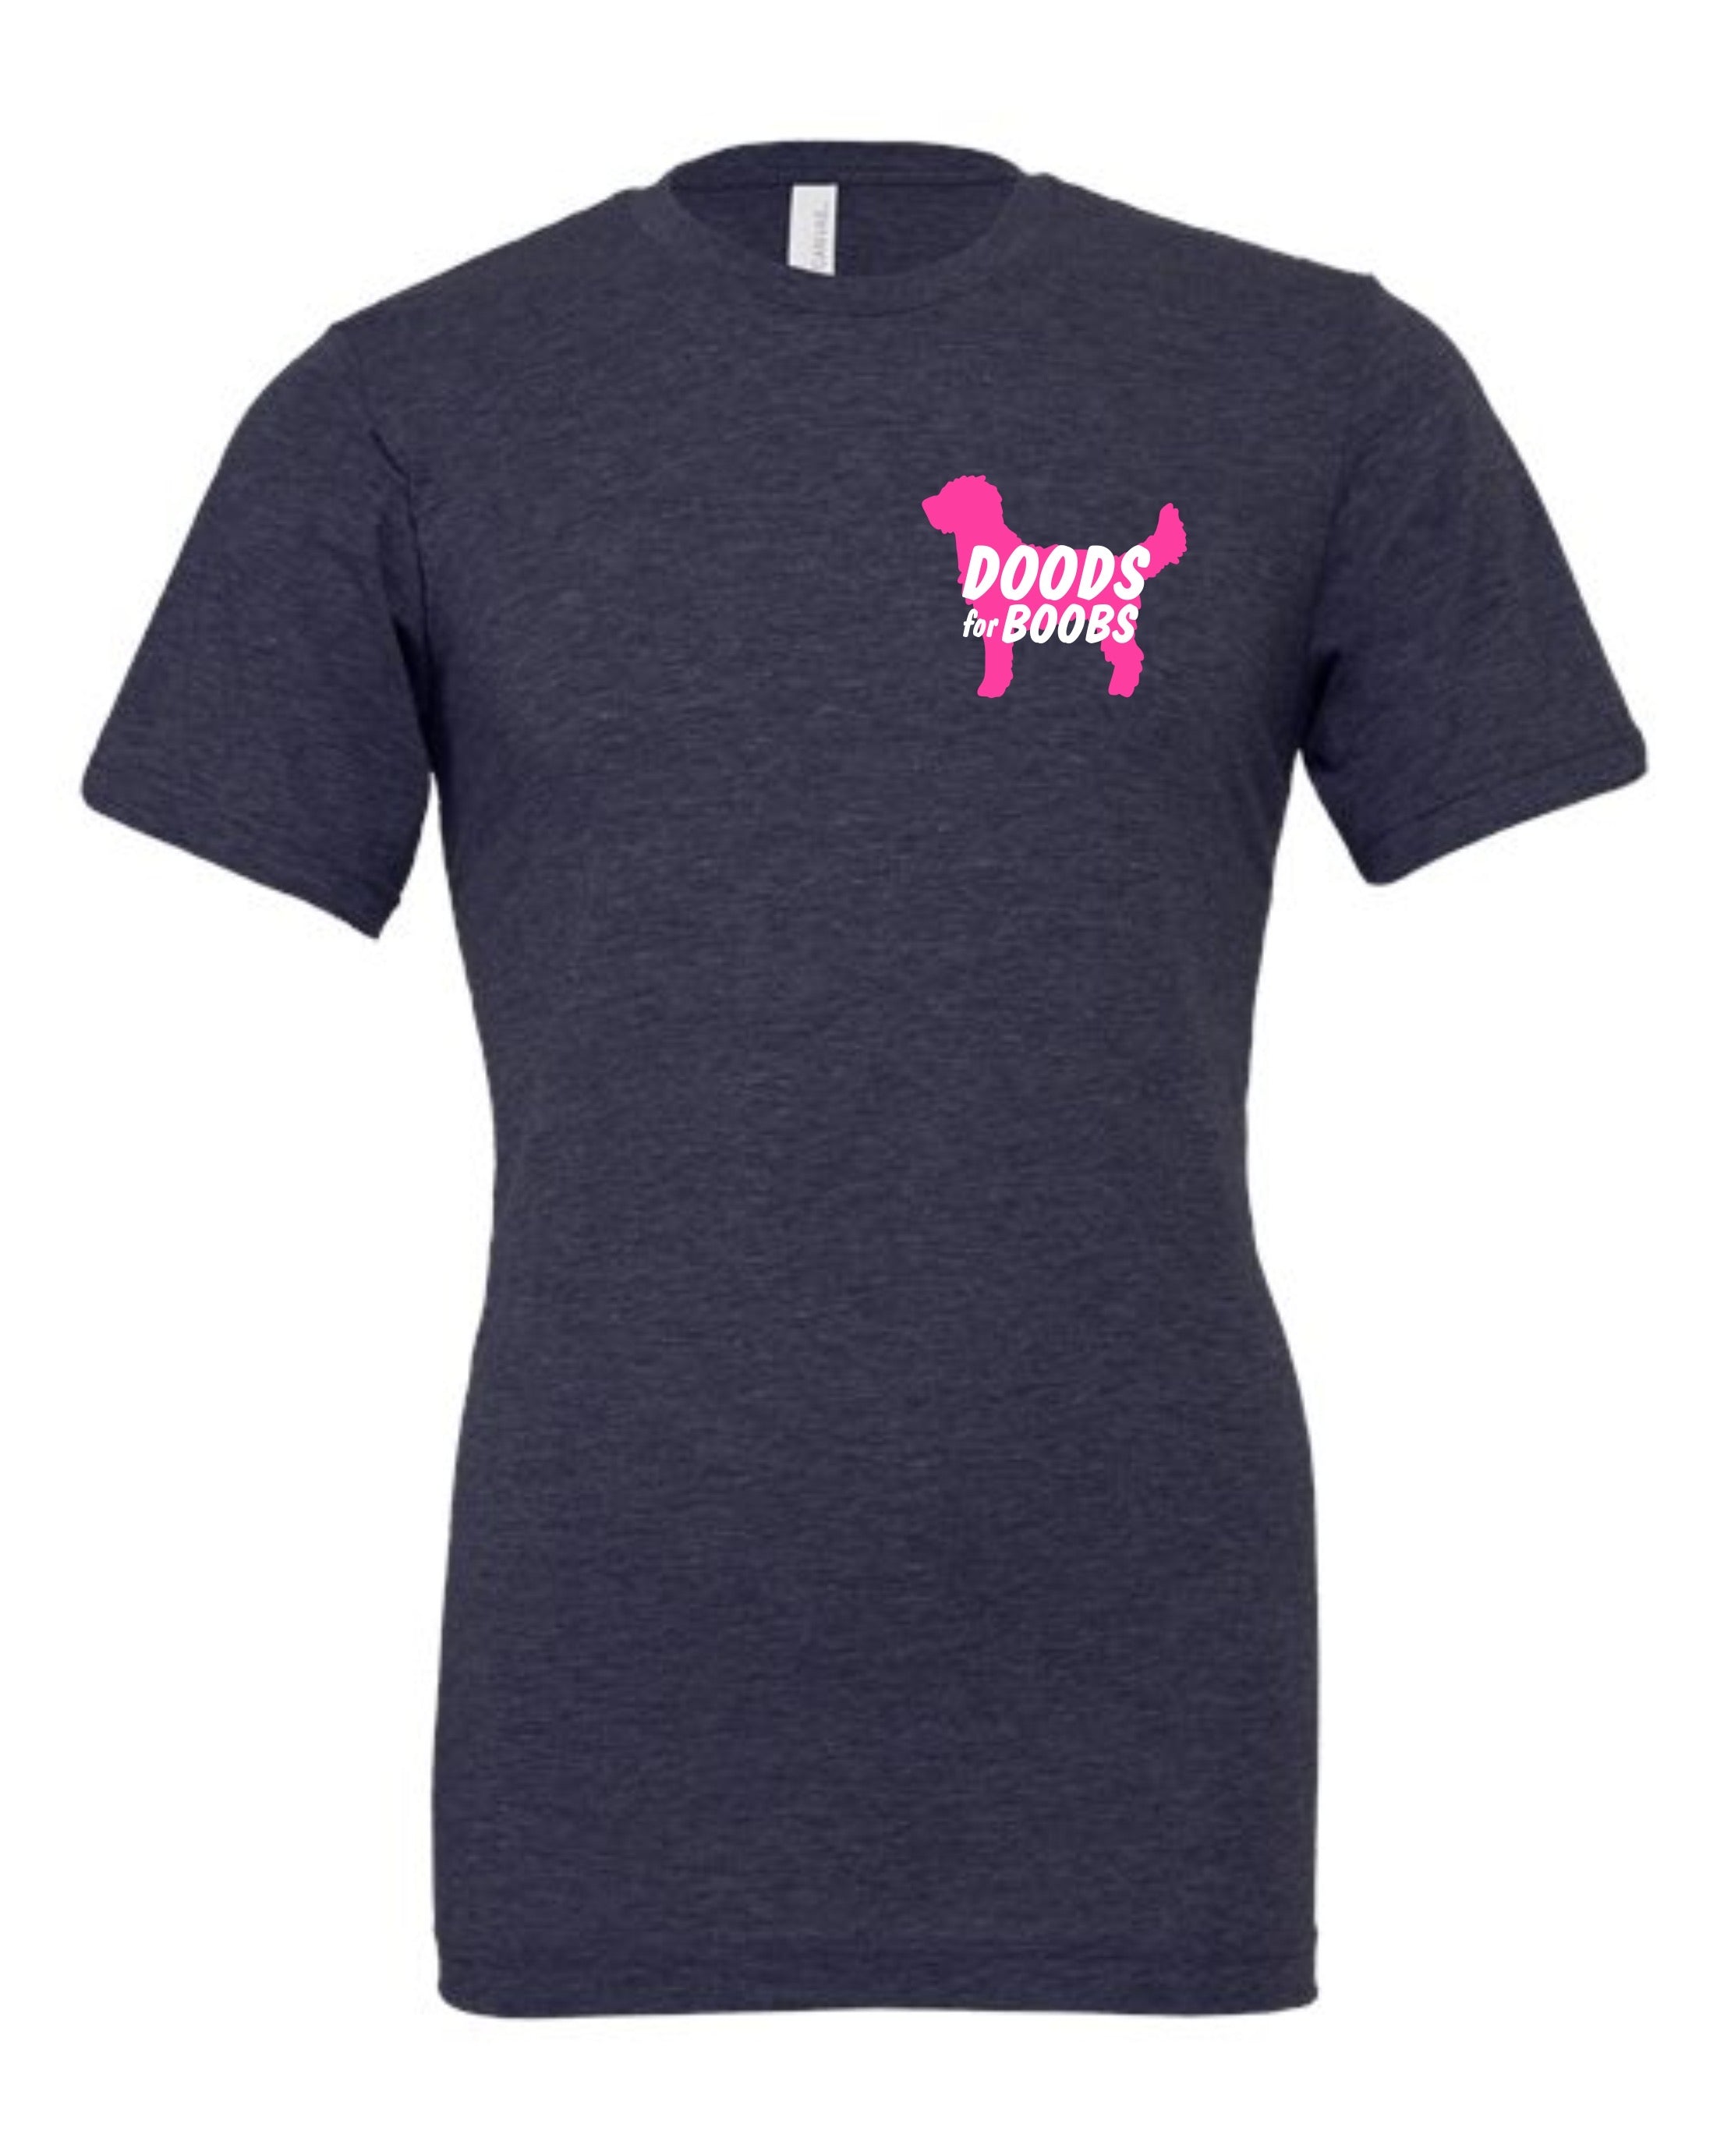 DOODS FOR BOOBS - Short Sleeve - Charcoal